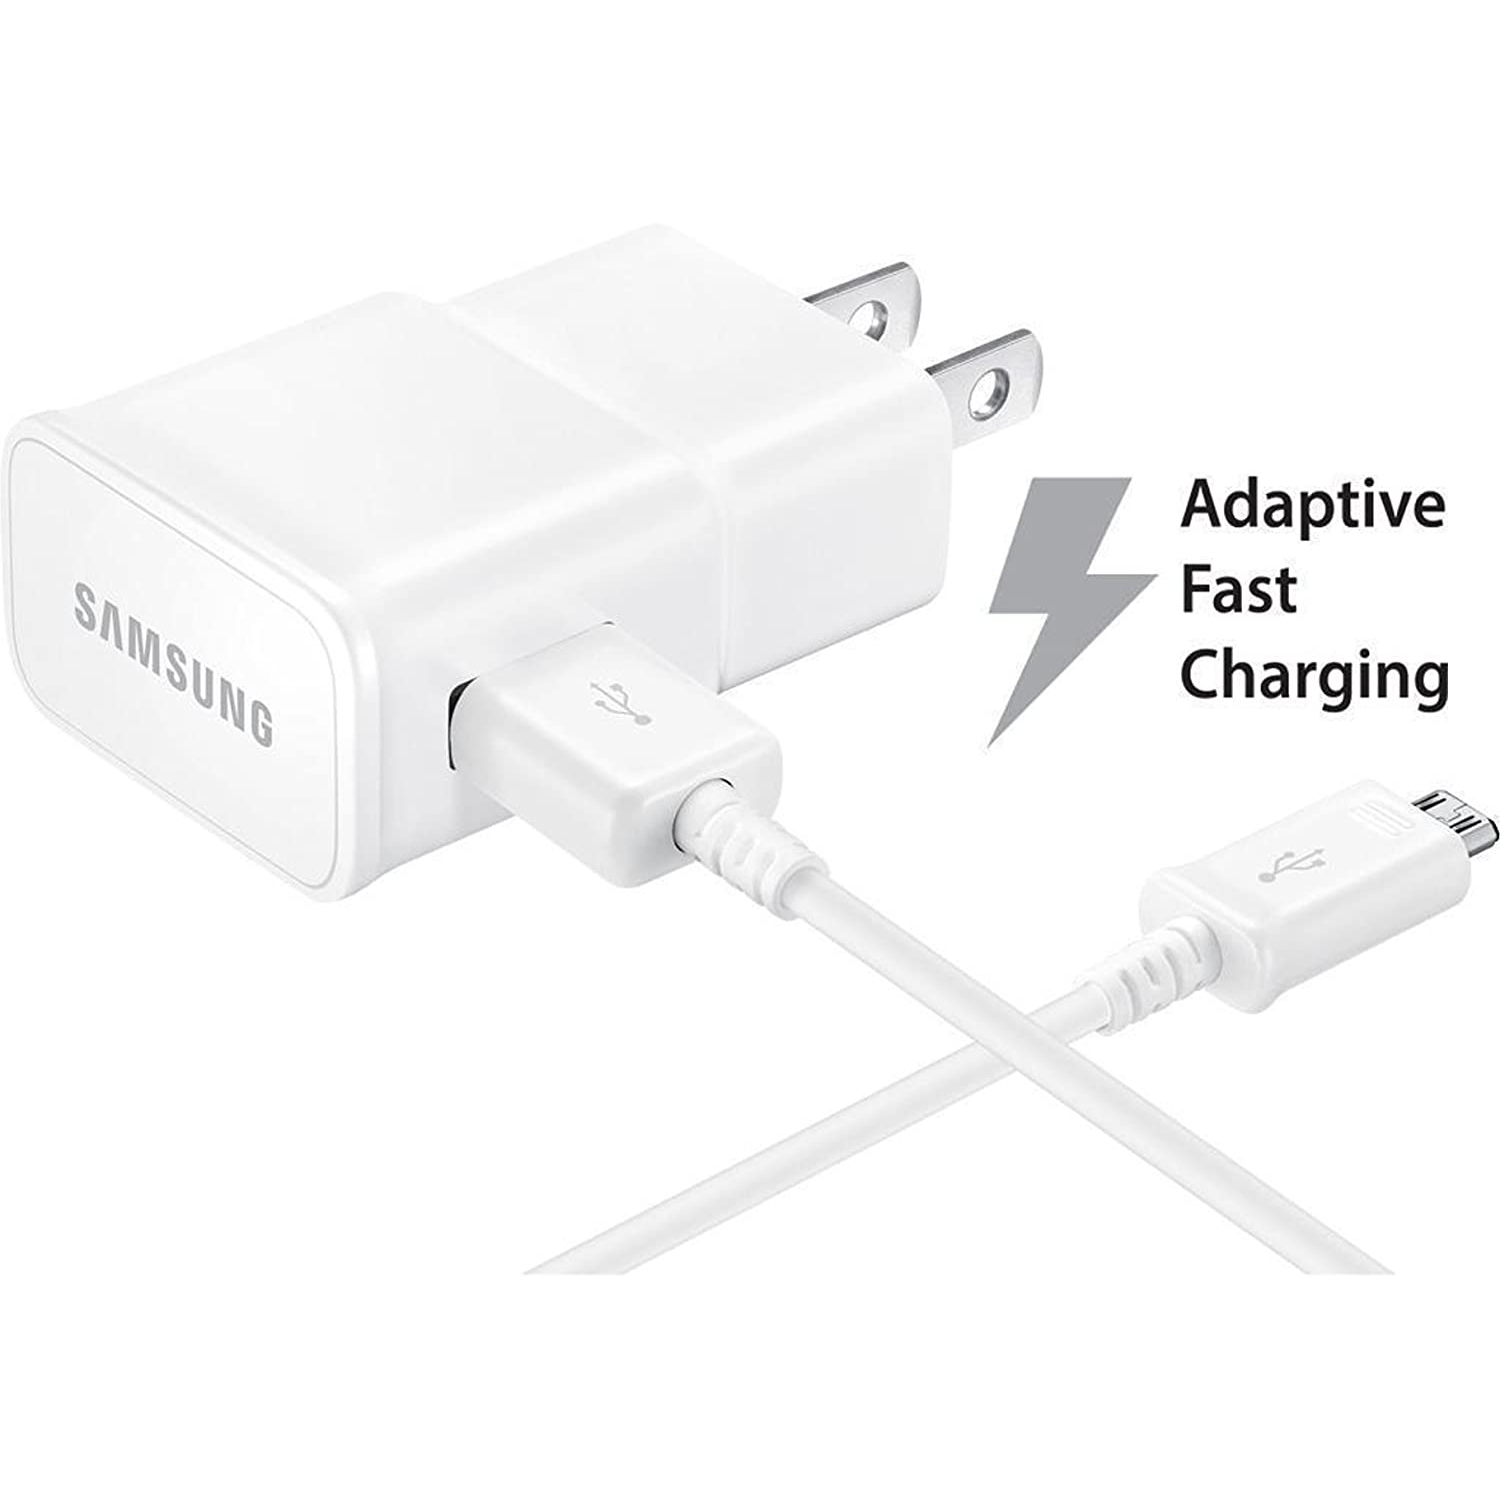 (CABLESHARK)For Samsung Compatible Adaptive Fast Charging Wall Charger Galaxy Note 4, Edge, S6/S6 Edge/Edge+, S6 Active